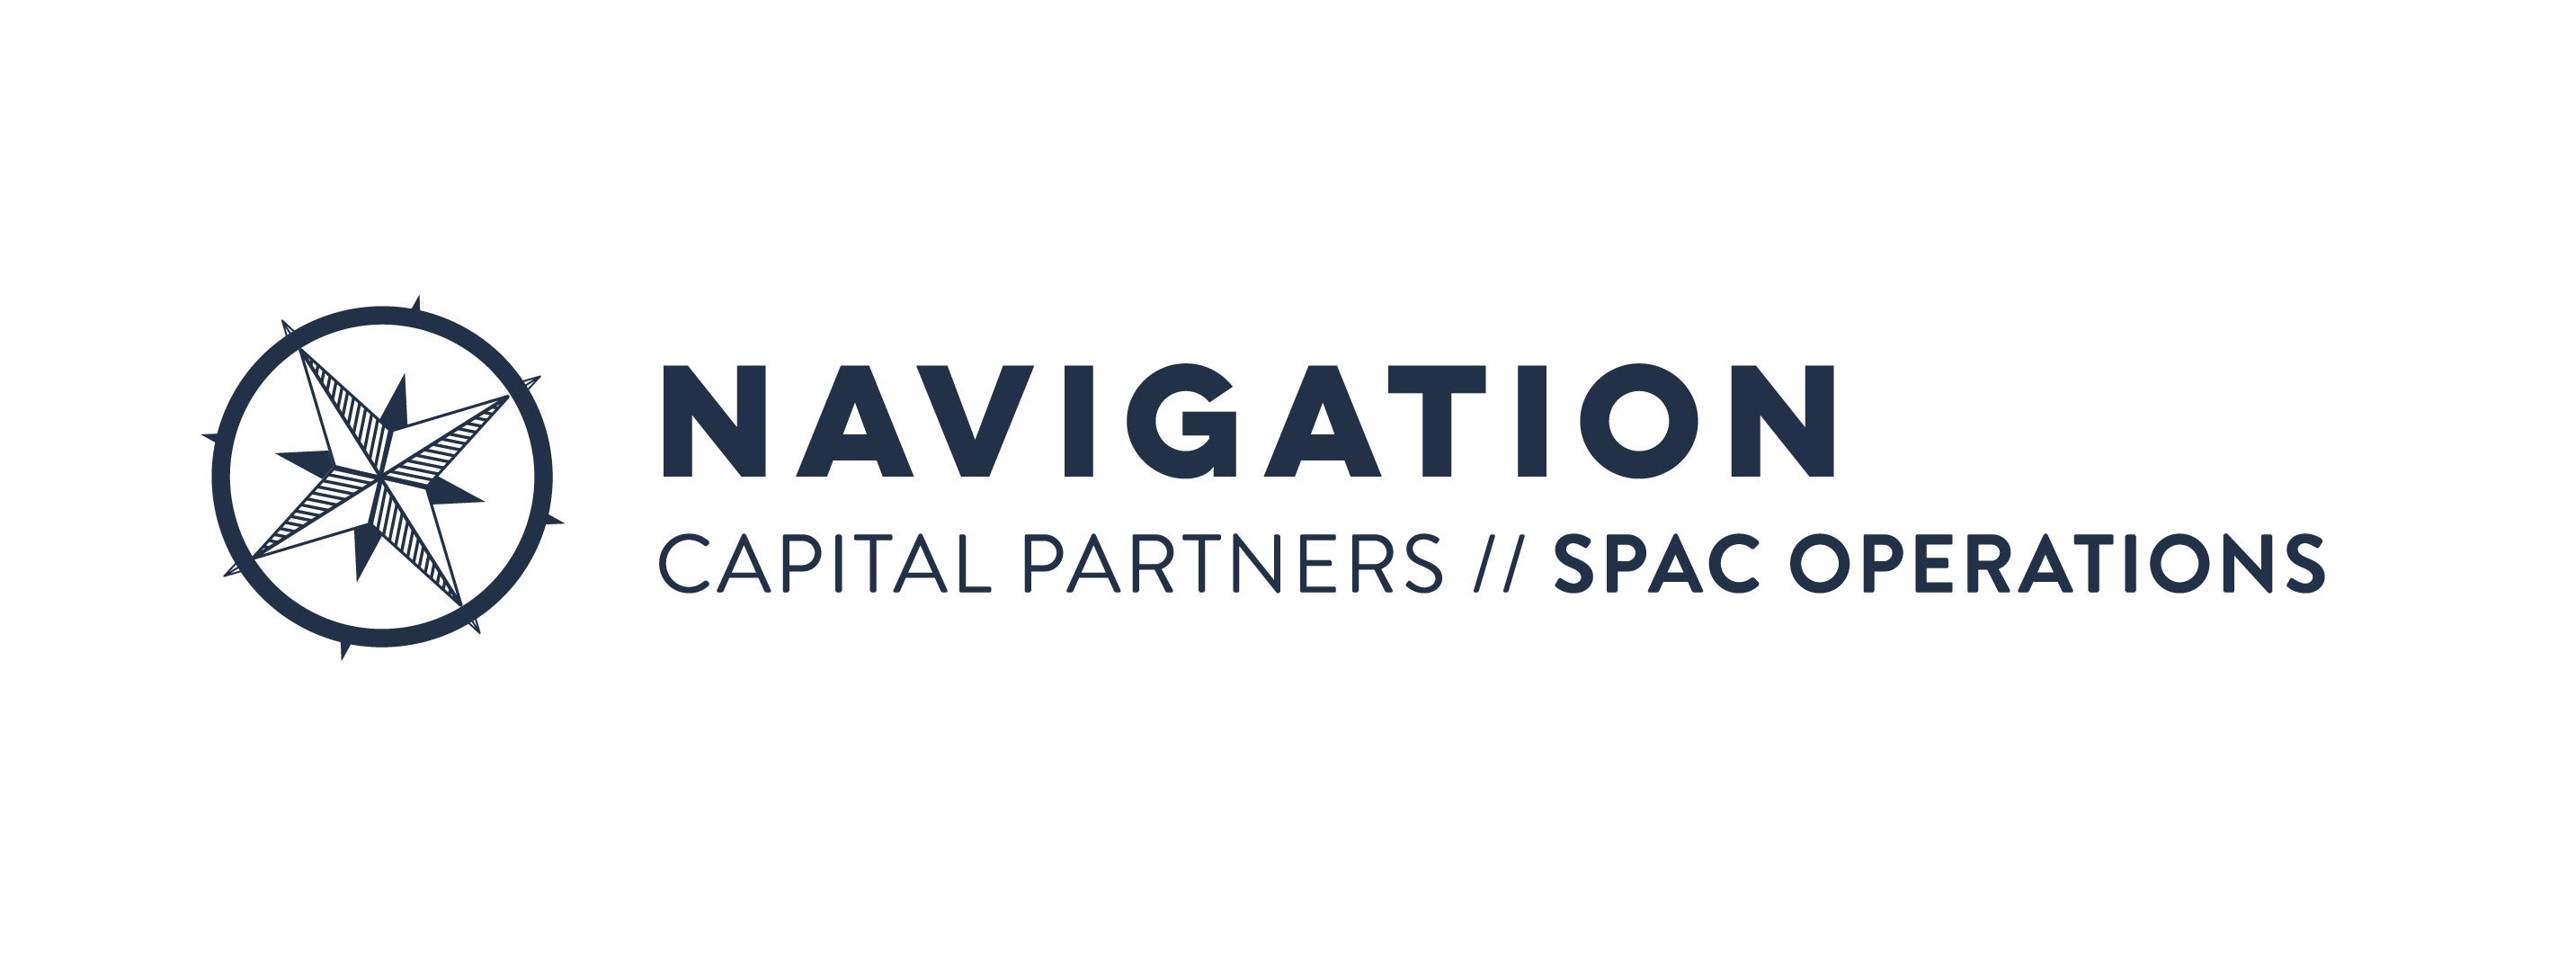 Kevin Keough Joins Navigation Capital Partners Spac Operations Group As Managing Director Of Operations